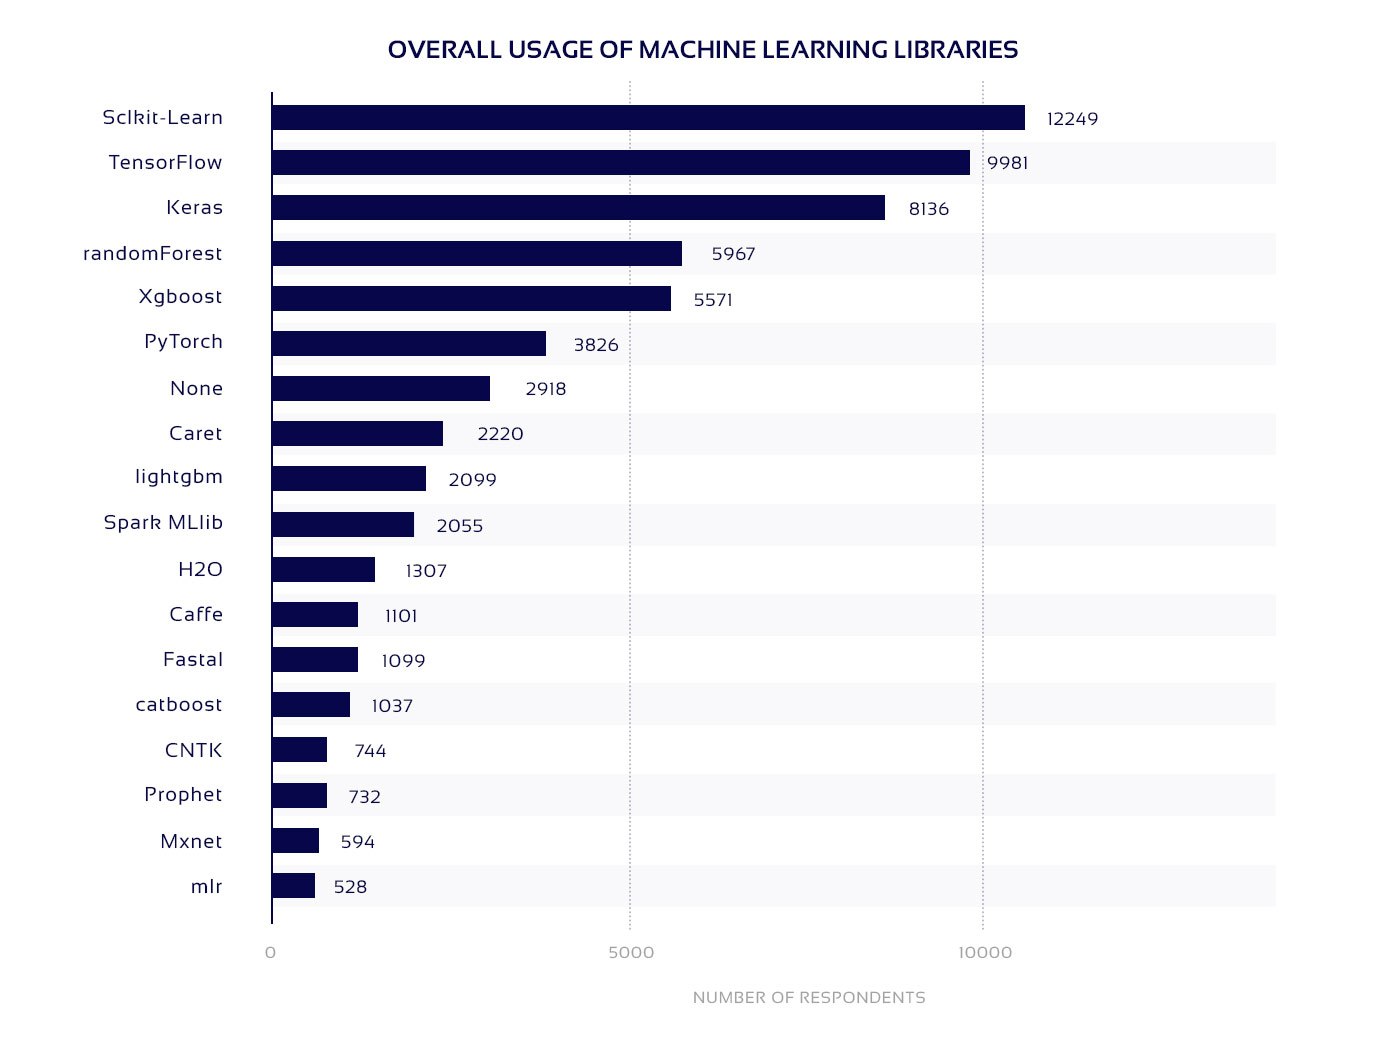 Overall usage of Python and R machine learning tools